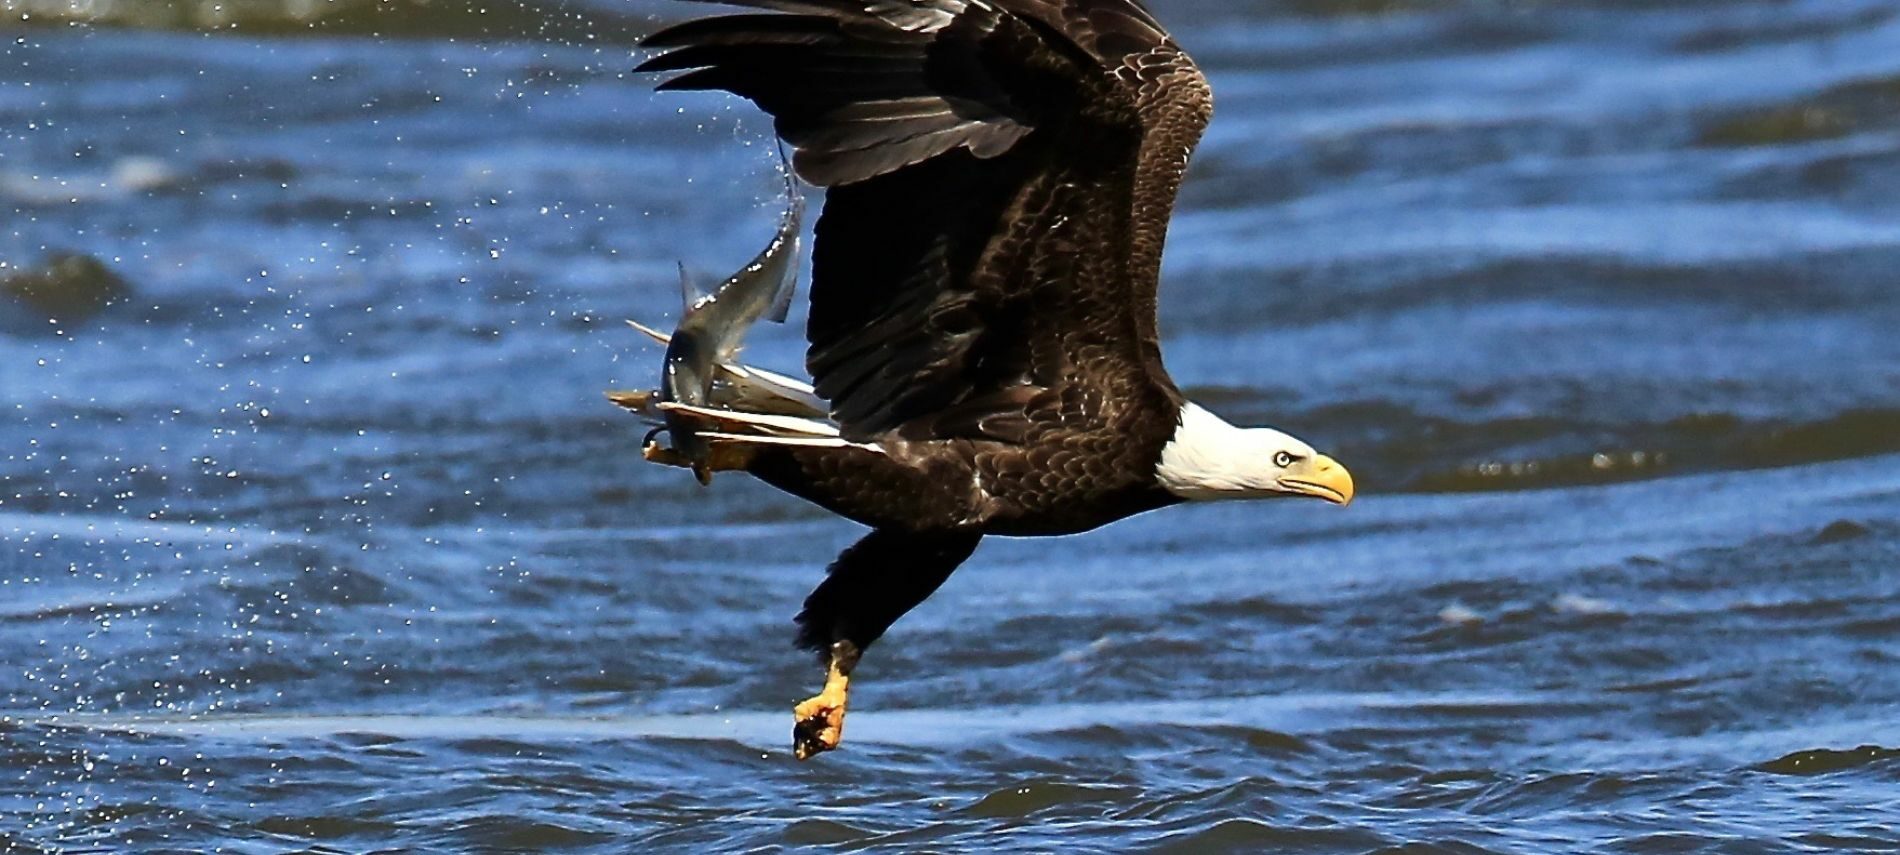 Bald eagle swooping over water with a fish caught in talons